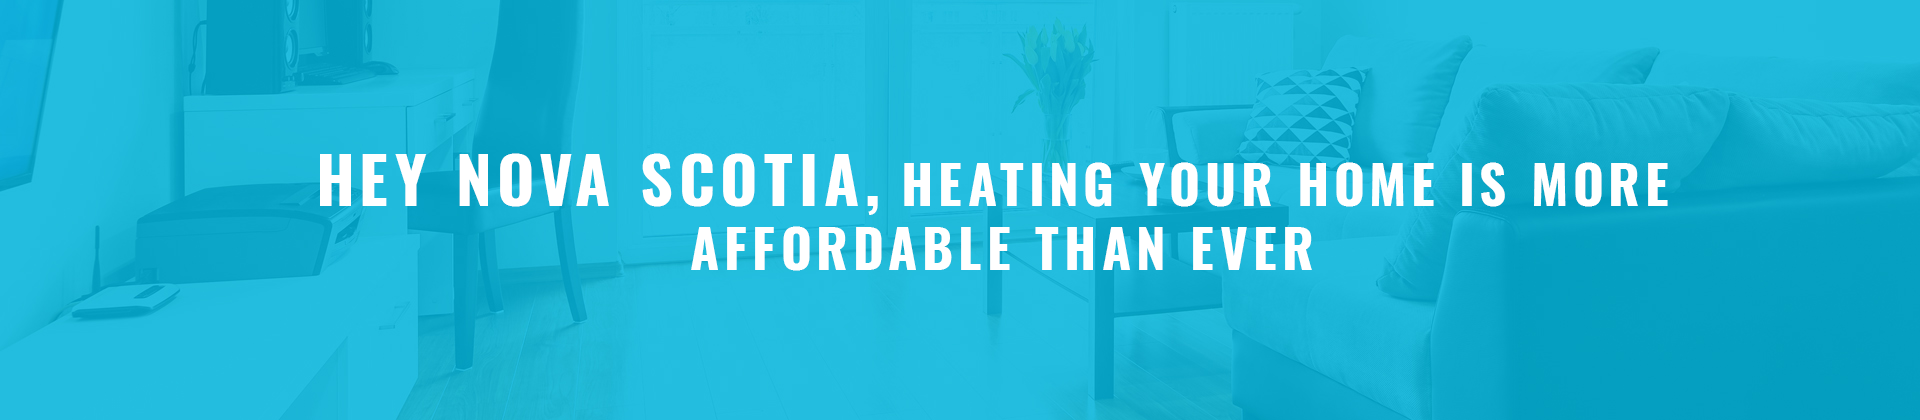 A photo of a home with text saying Hey Nova Scotia, Heating Your Home is More Affordable Than Ever promoting Steffes Electric Thermal Storage heaters